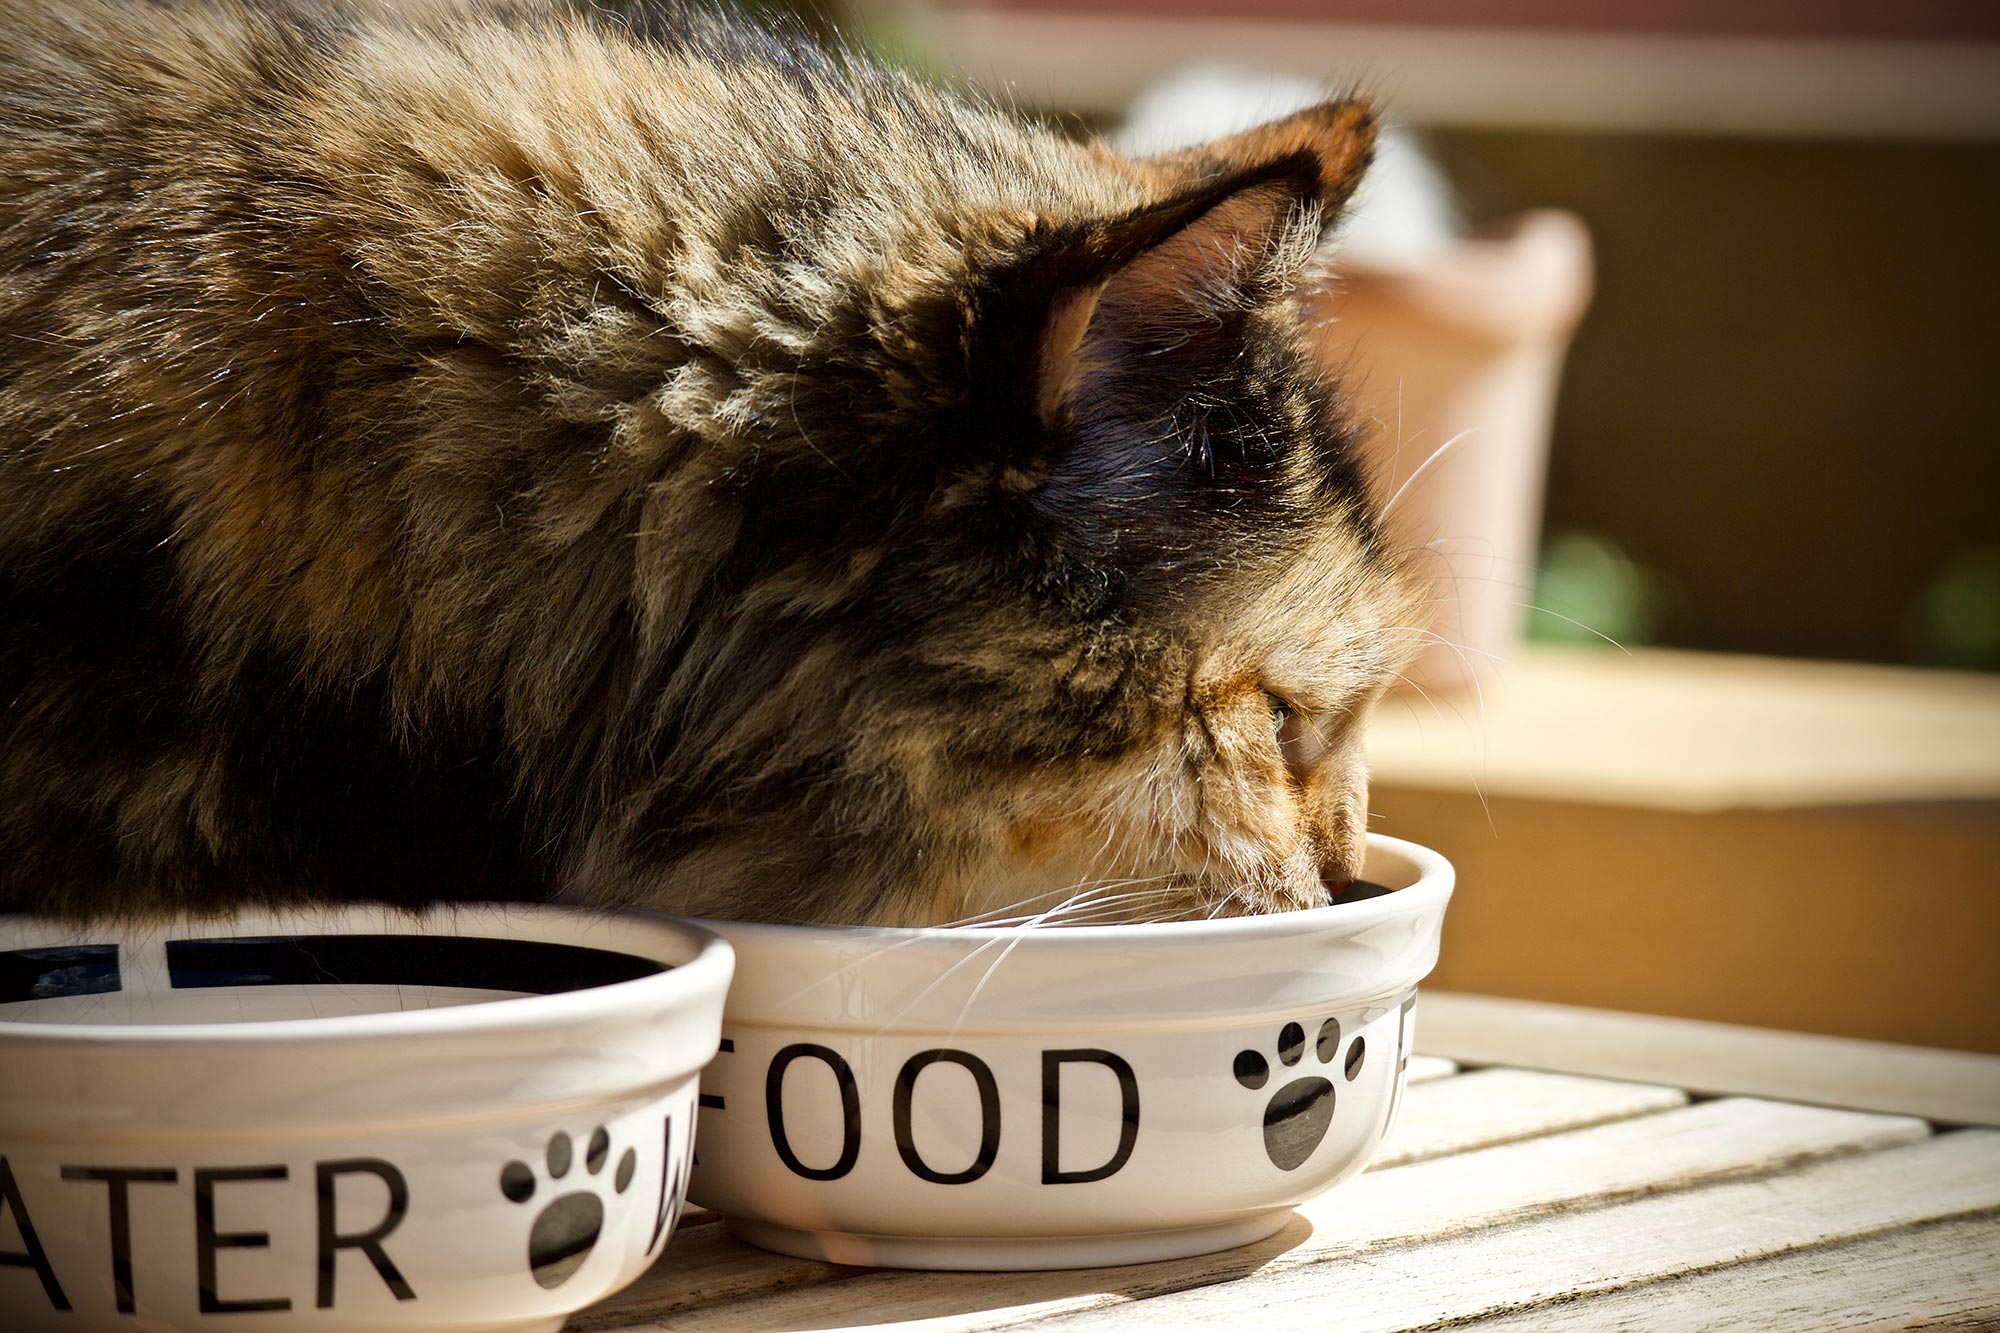 How Often You Feed Cats Could Be Critical for Their Health – Here’s